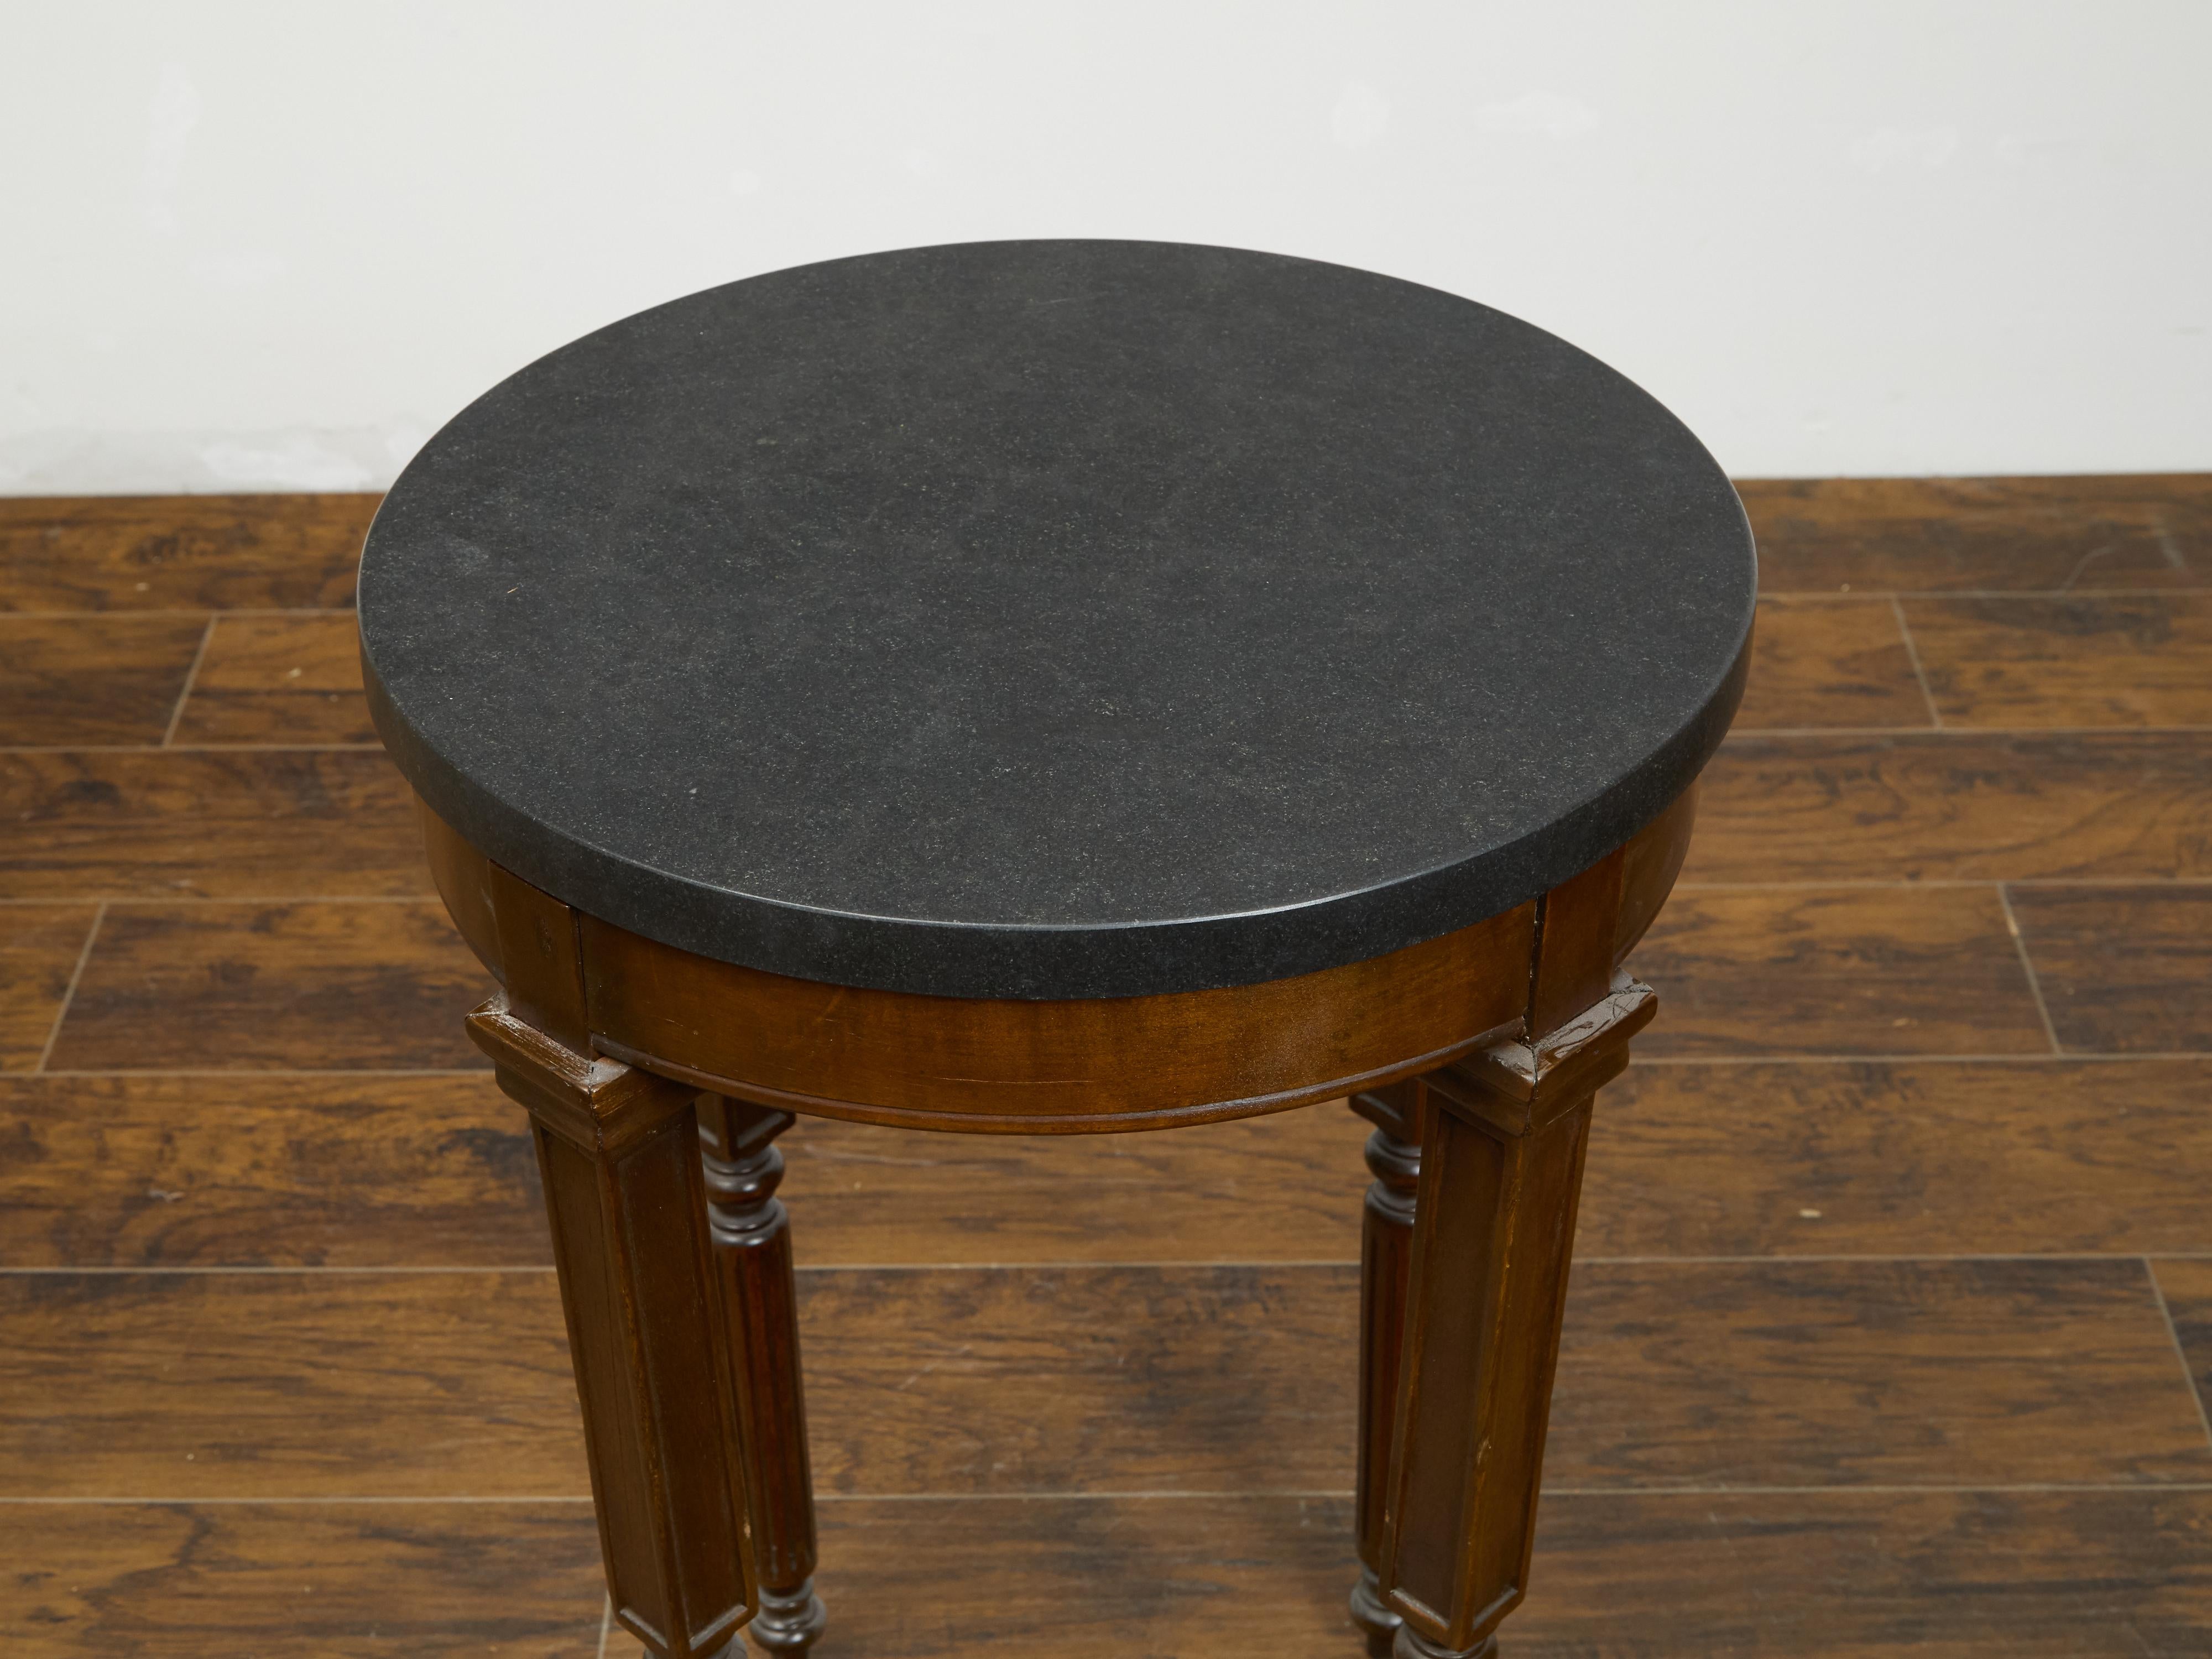 French 19th Century Wooden Guéridon Table with Circular Black Marble Top For Sale 2